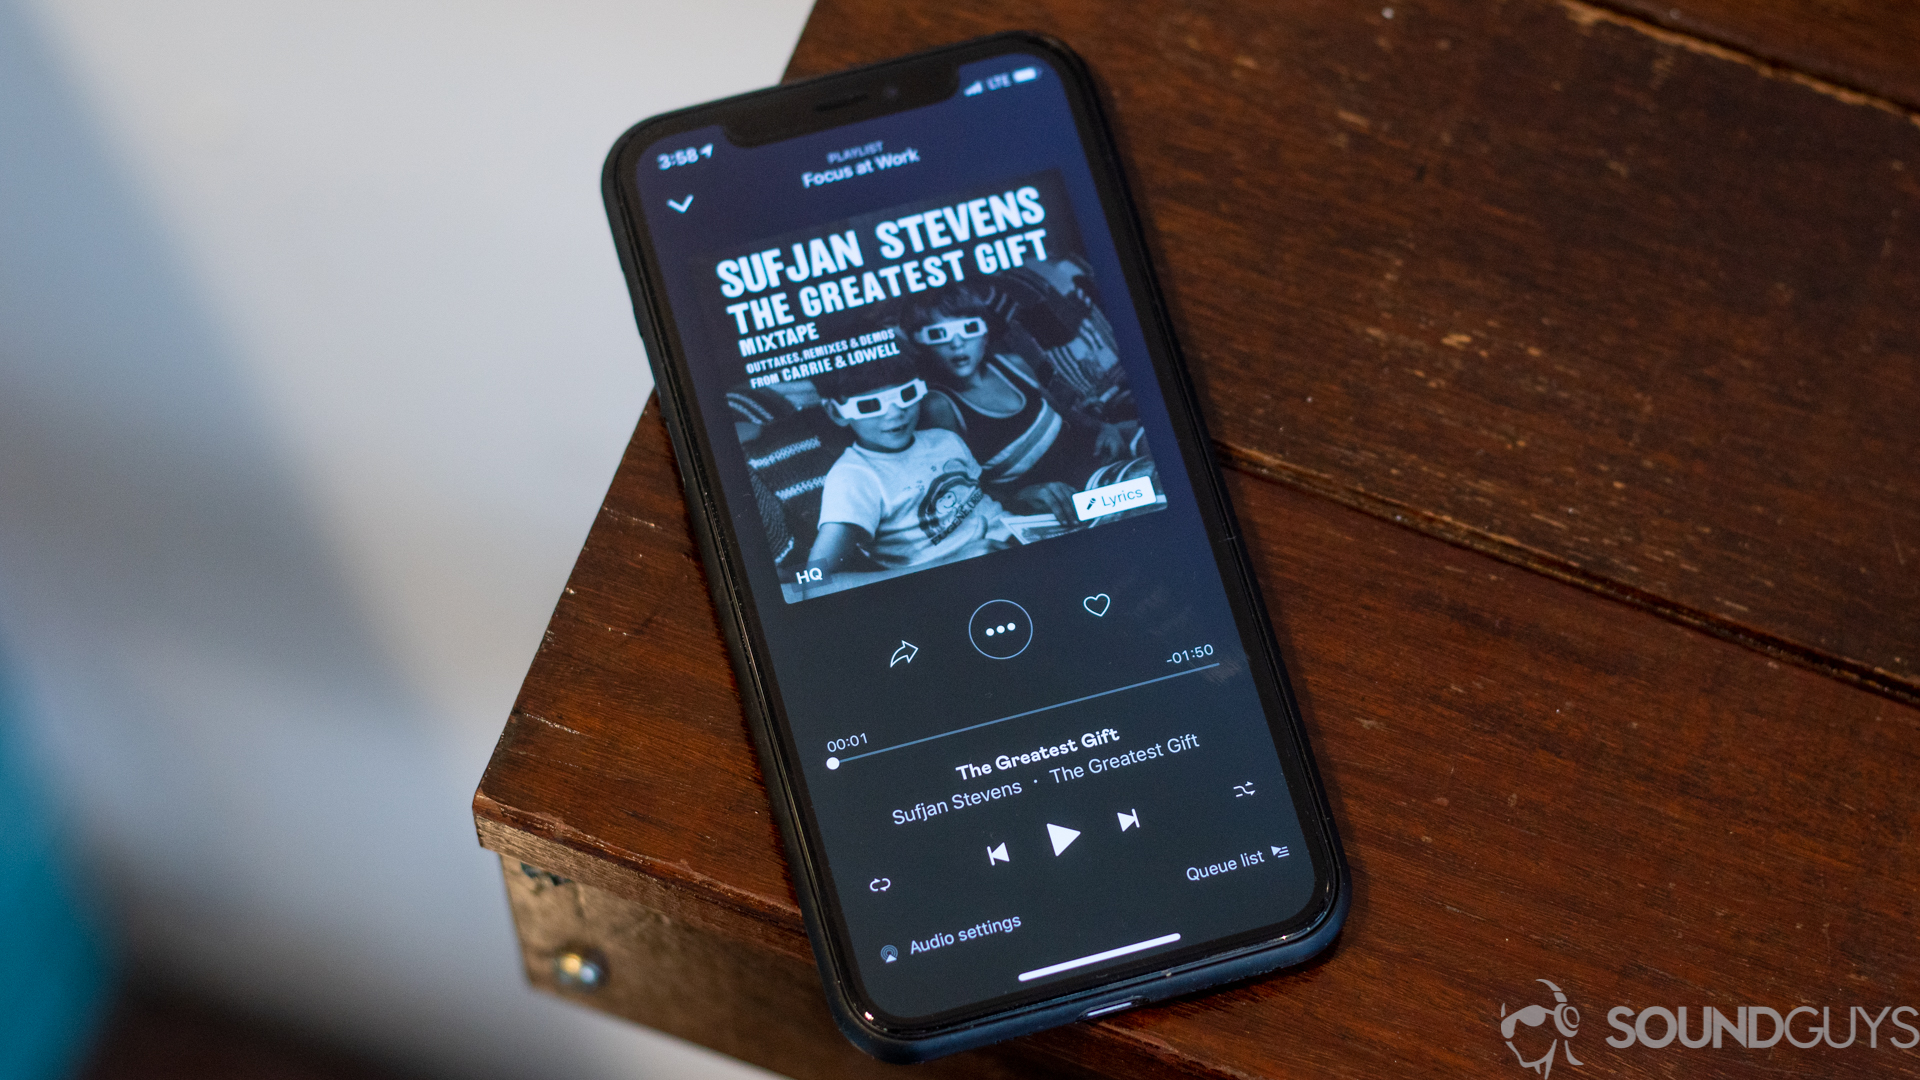 Pictured is the main playing now section of the Deezer app on an iPhone 11 Pro on wood table.